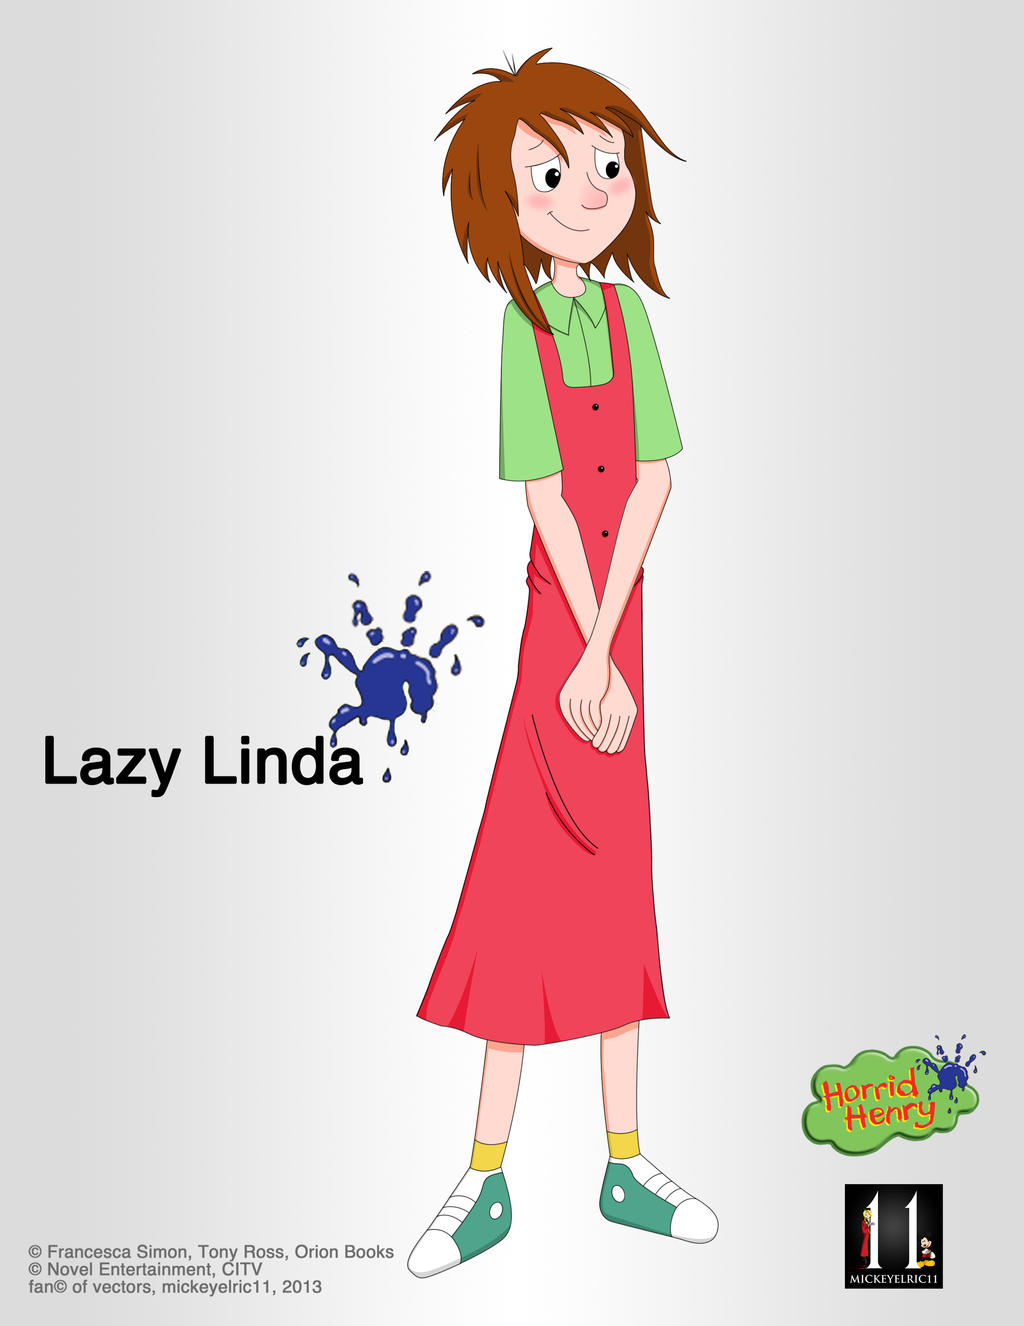 Horrid Henry: Lazy Linda, the Underrated Ship by mickeyelric11 on DeviantArt